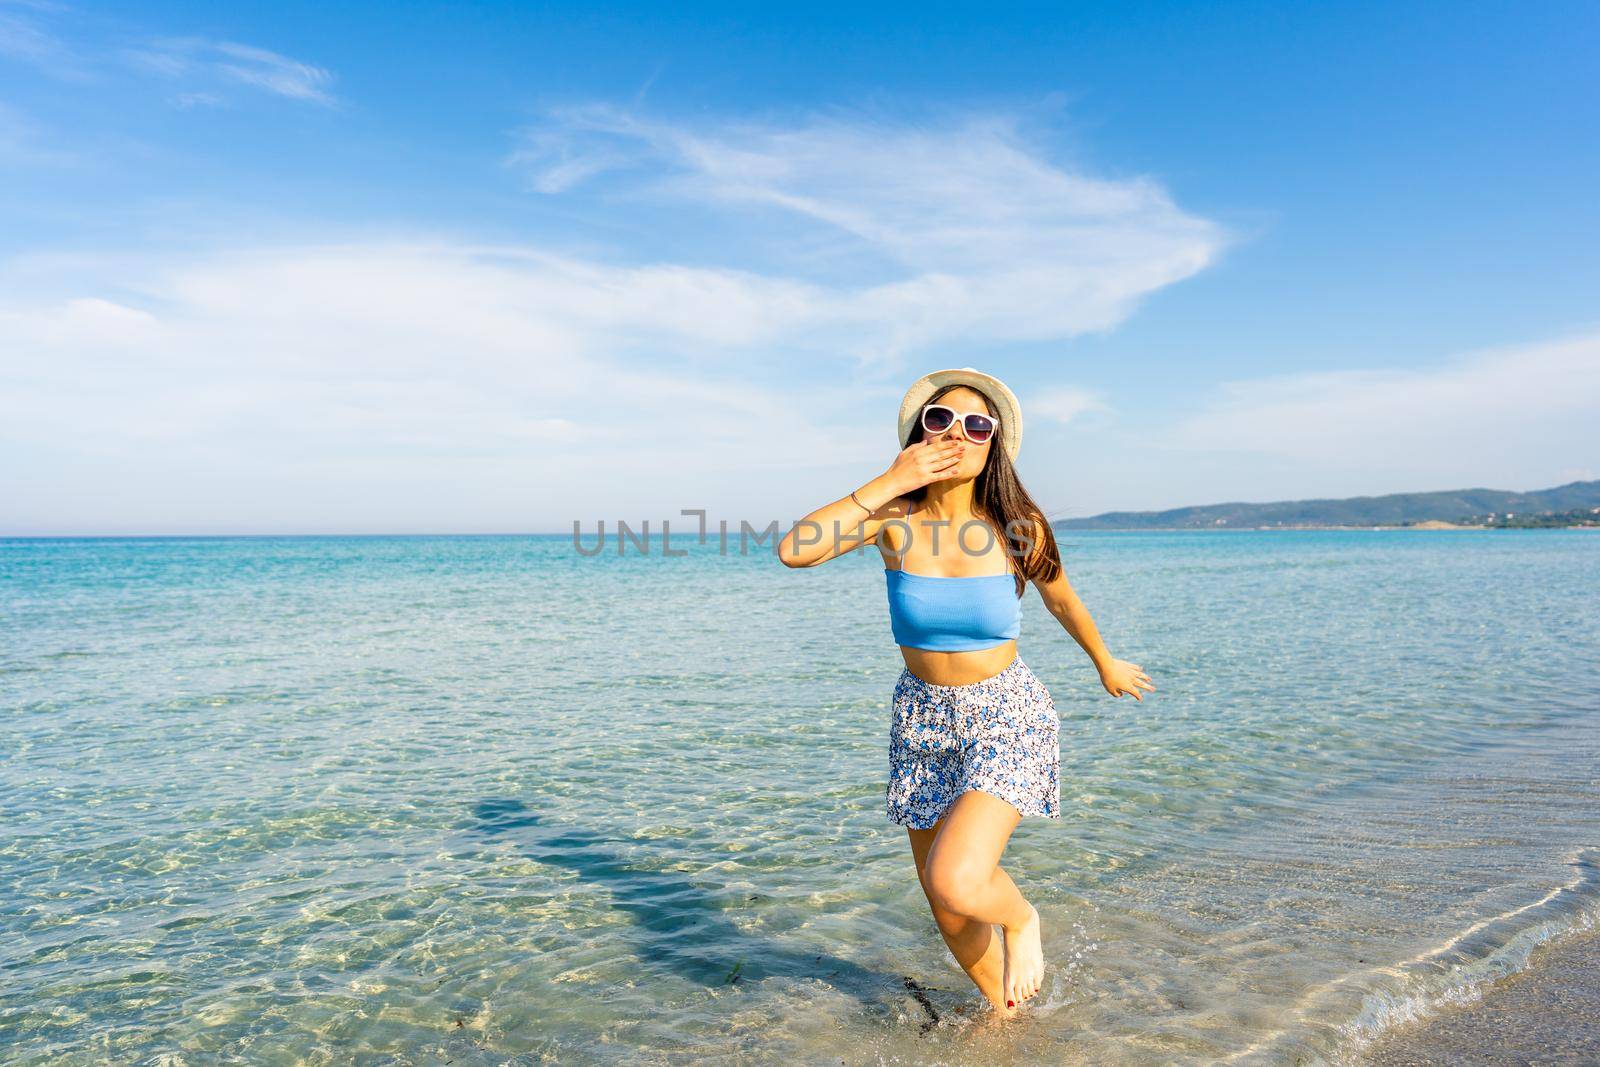 Young beautiful woman making kiss gesture with hand on mouth looking at camera walking in the seawater wearing white hat and sunglasses. Spend your time in travel for a happy better life experience by robbyfontanesi